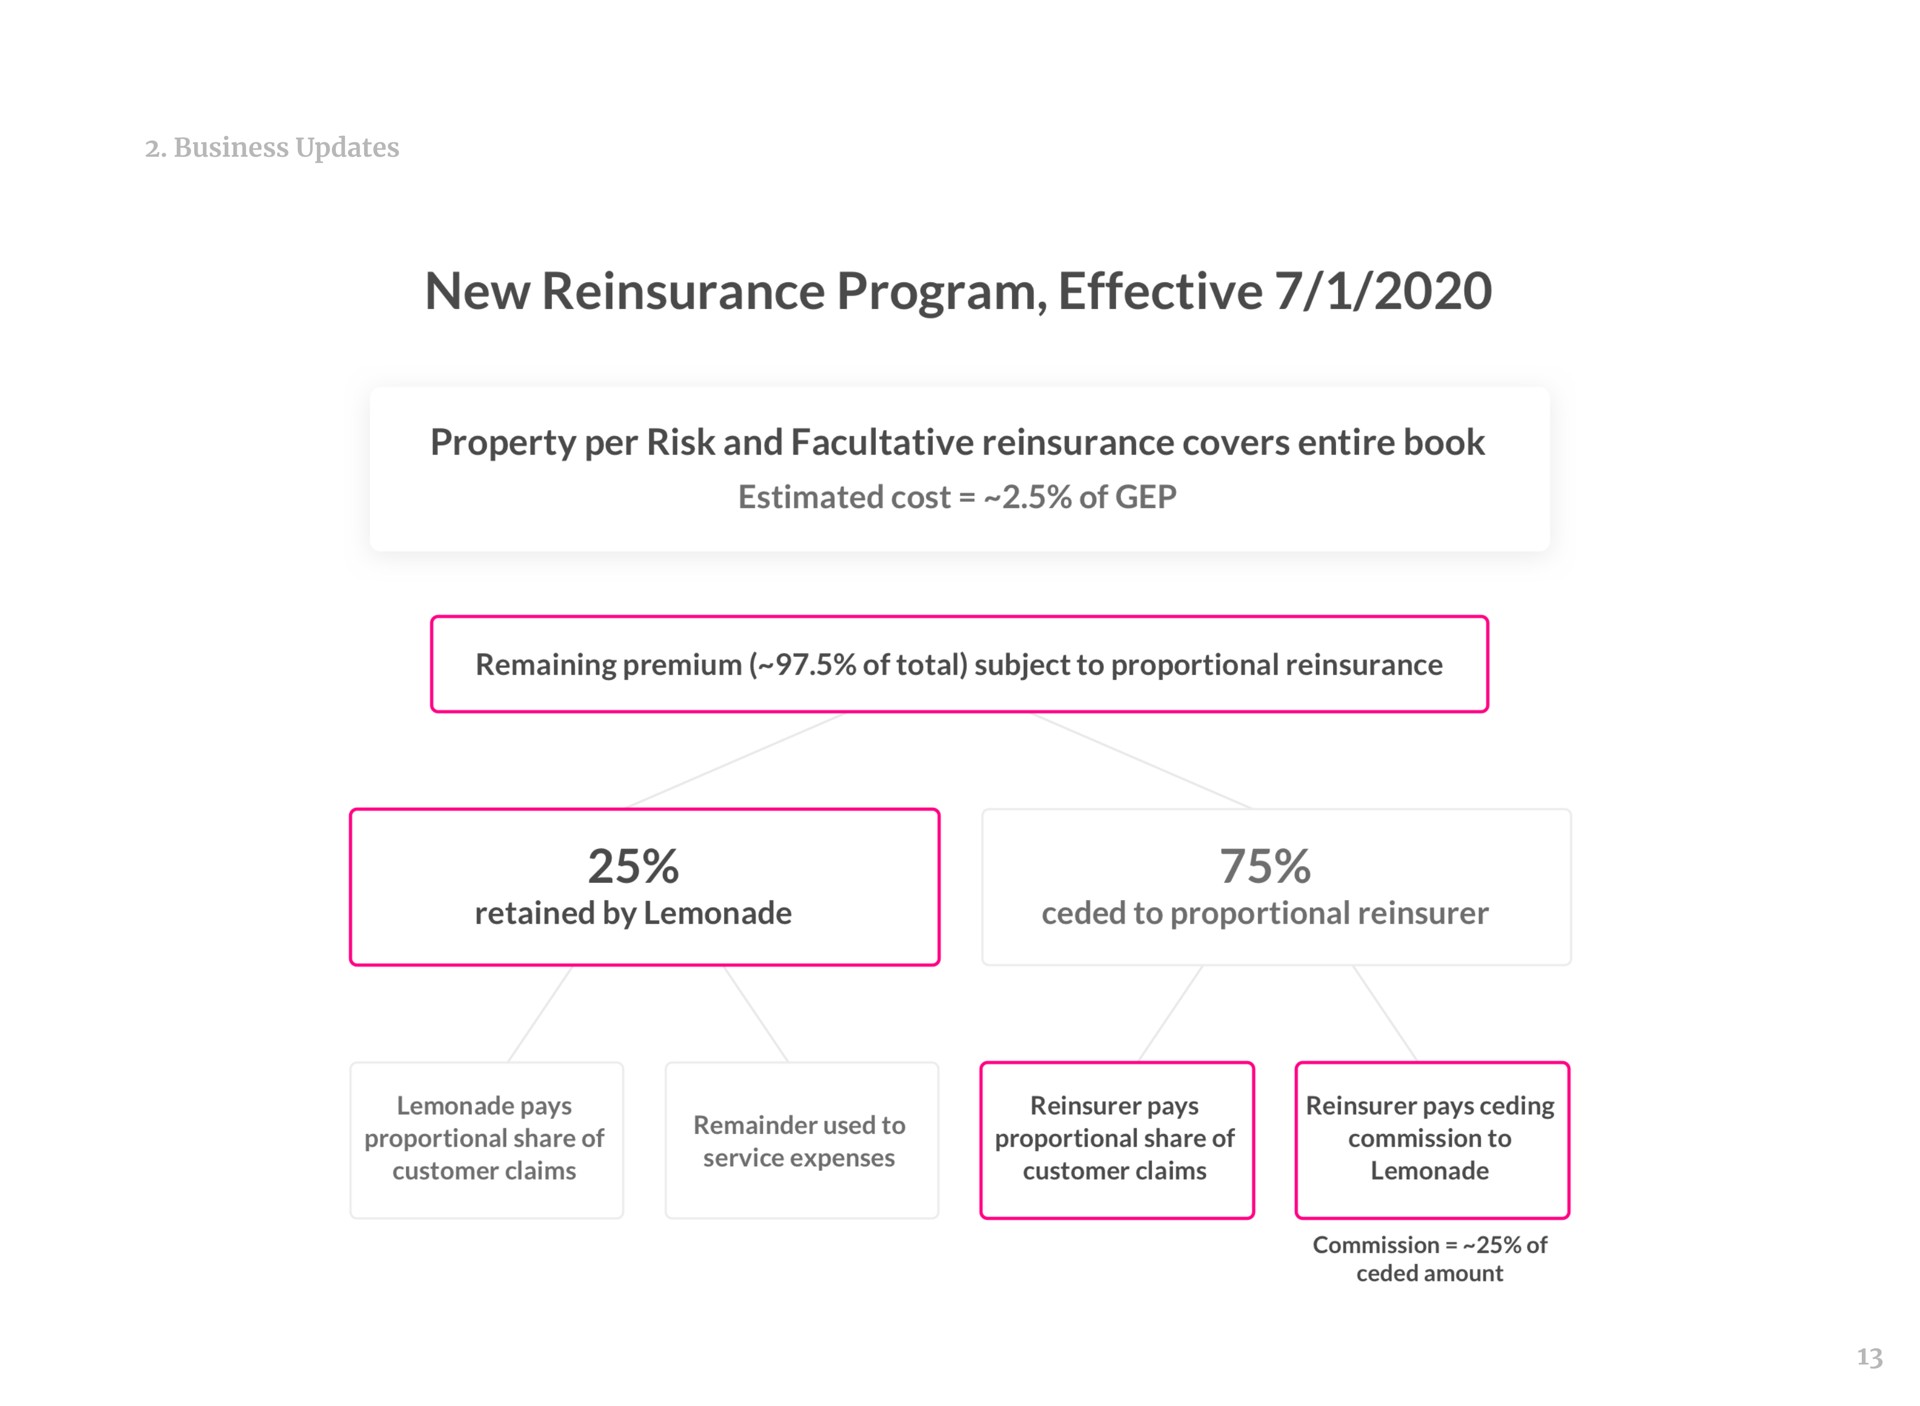 new reinsurance program effective property per risk and facultative reinsurance covers entire book estimated cost of remaining premium of total subject to proportional reinsurance retained by lemonade ceded to proportional reinsurer | Lemonade